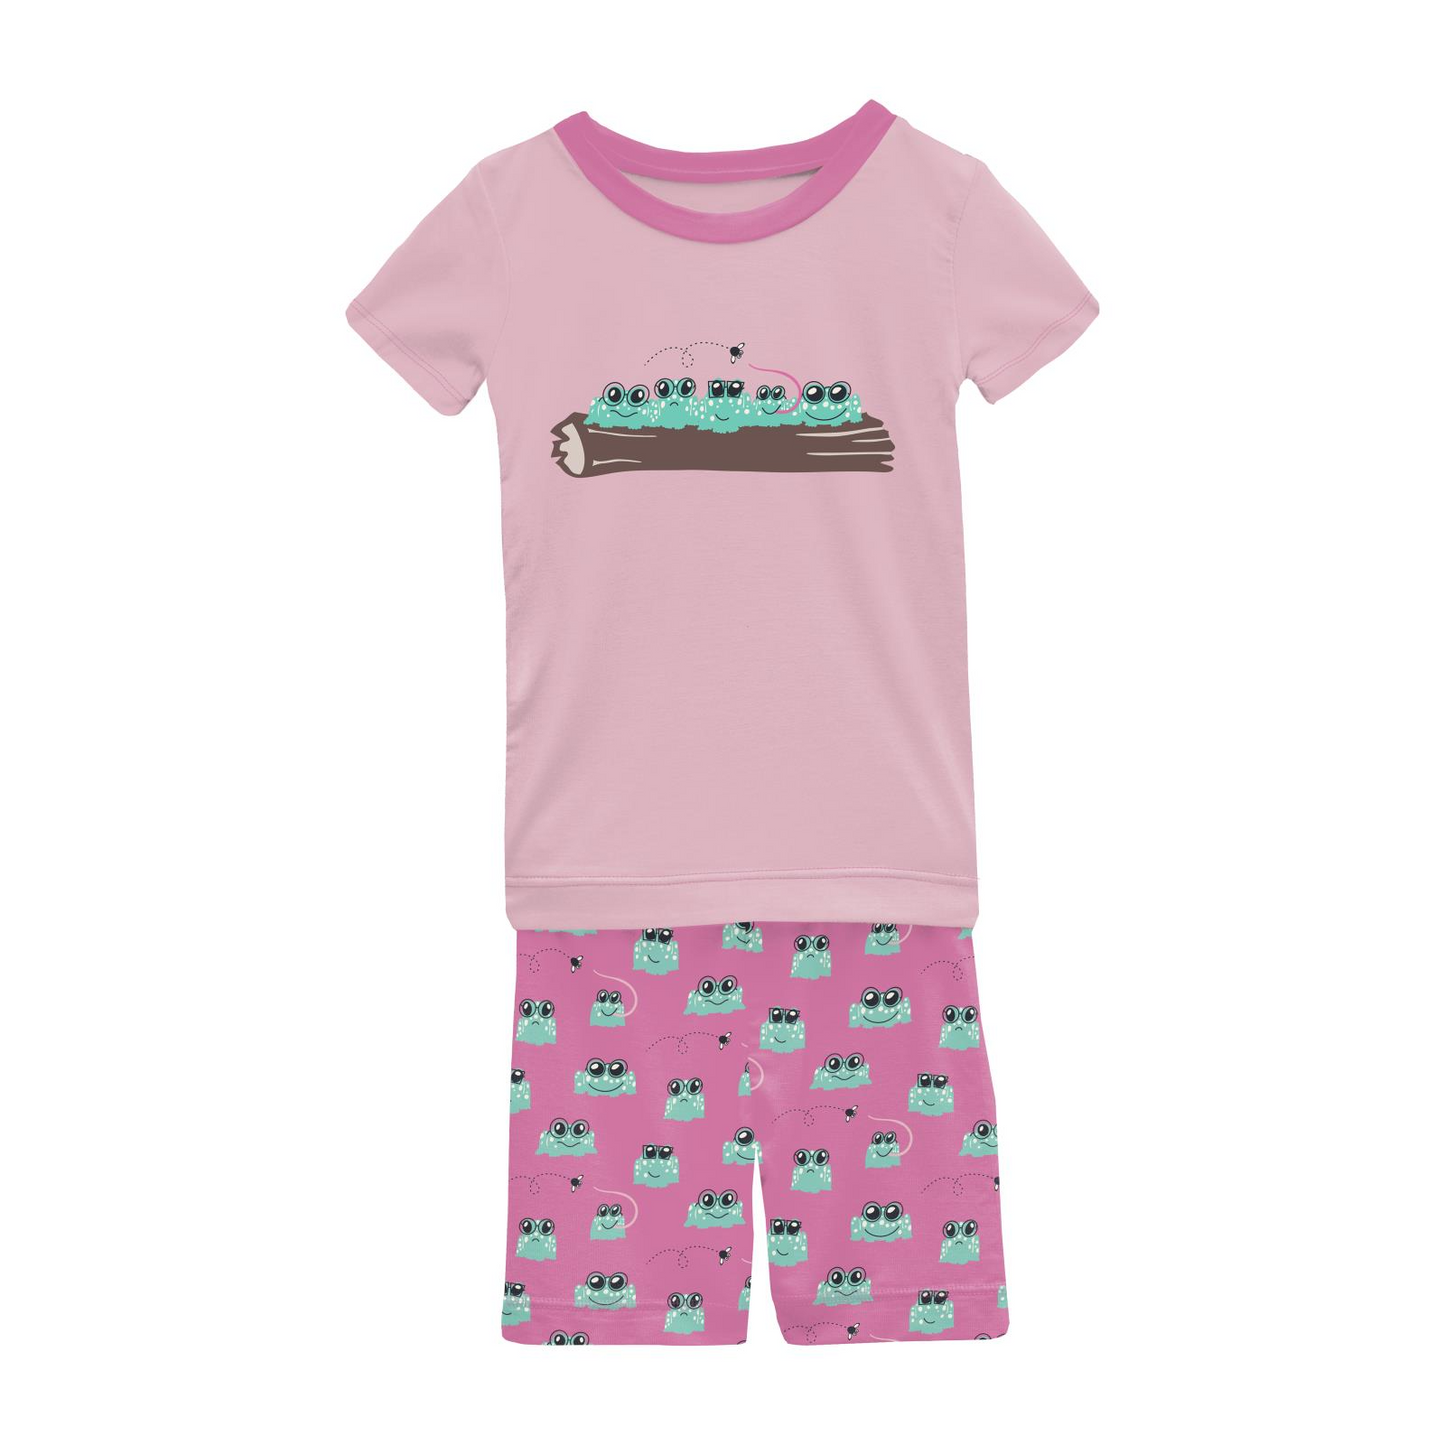 Short Sleeve Graphic Tee Pajama Set: Tulip Bespeckled Frogs